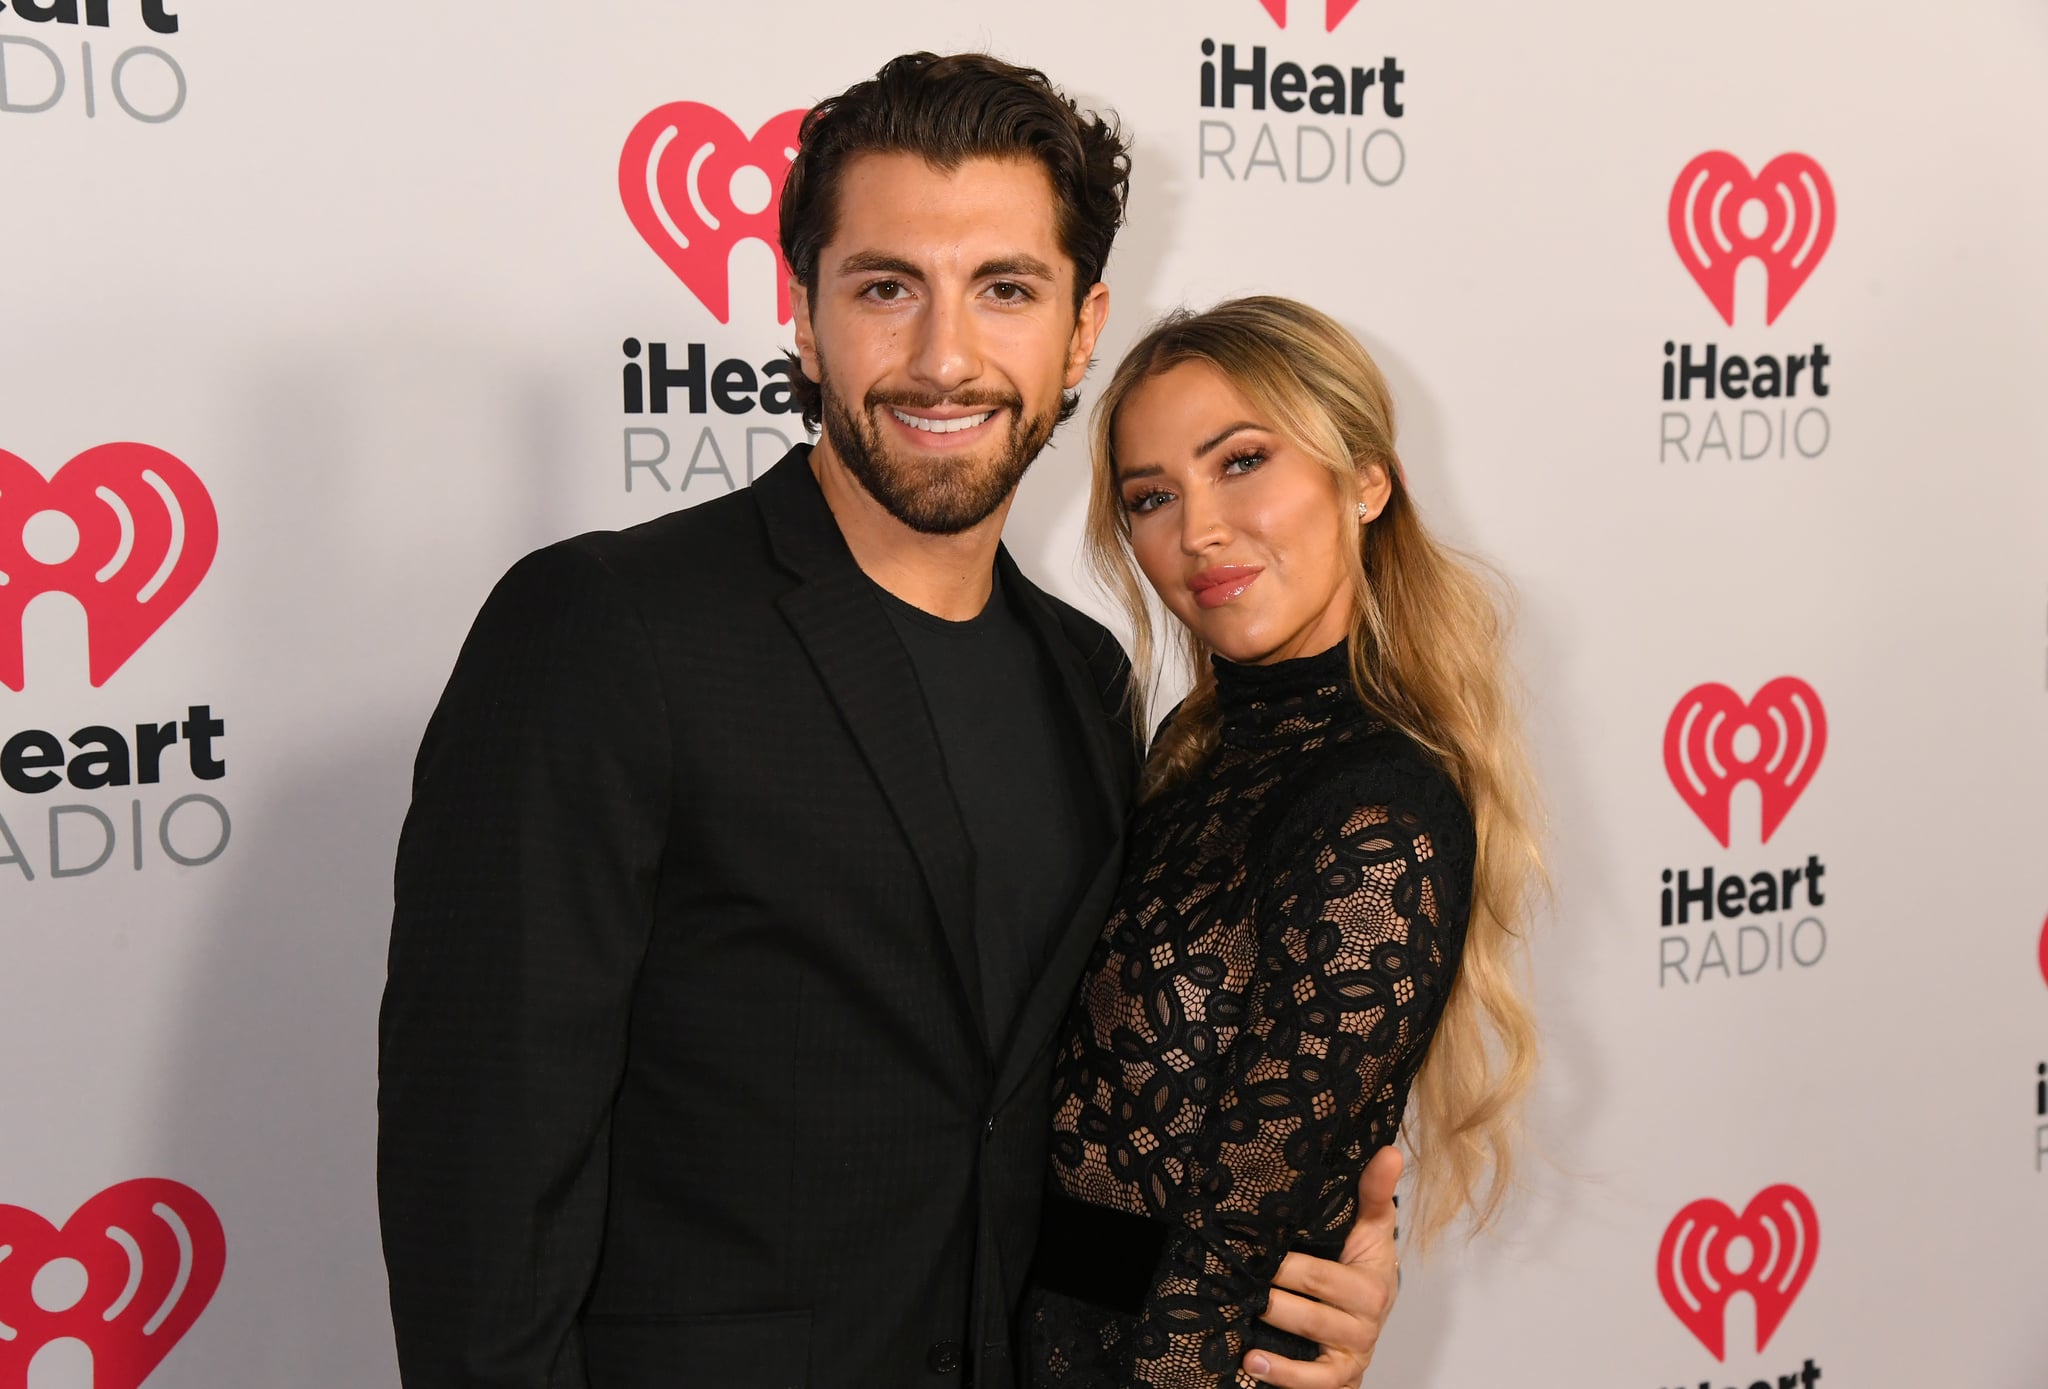 BURBANK, CALIFORNIA - JANUARY 17: (FOR EDITORIAL USE ONLY) (L-R) Jason Tartick and Kaitlyn Bristowe attend the 2020 iHeartRadio Podcast Awards at the iHeartRadio Theater on January 17, 2020 in Burbank, California. (Photo by Jeff Kravitz/FilmMagic for iHeartMedia)